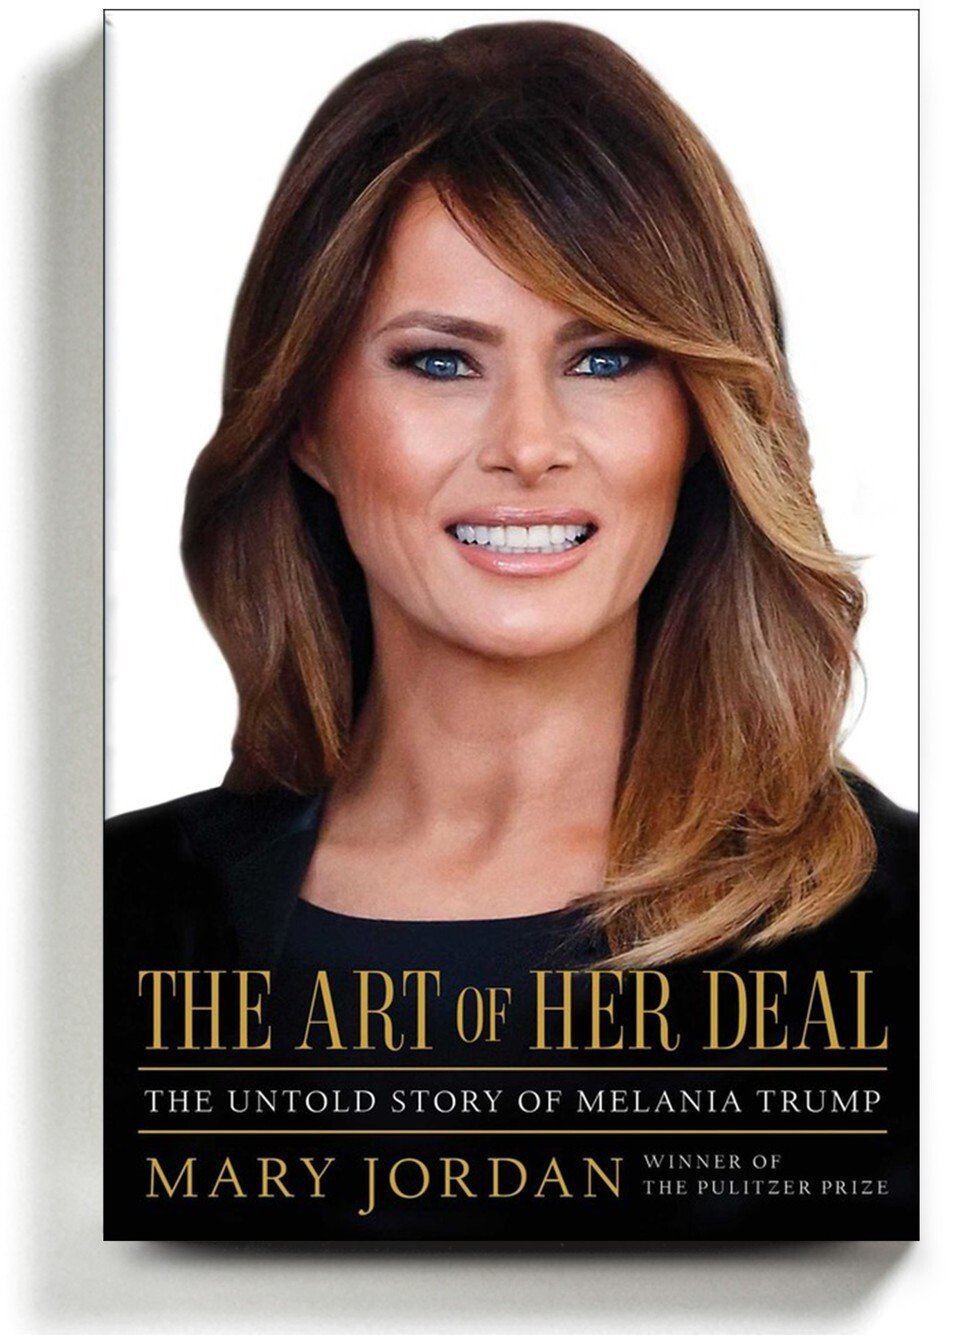 The Art of Her Deal: The Untold Story of Melania Trump by Mary Jordan.